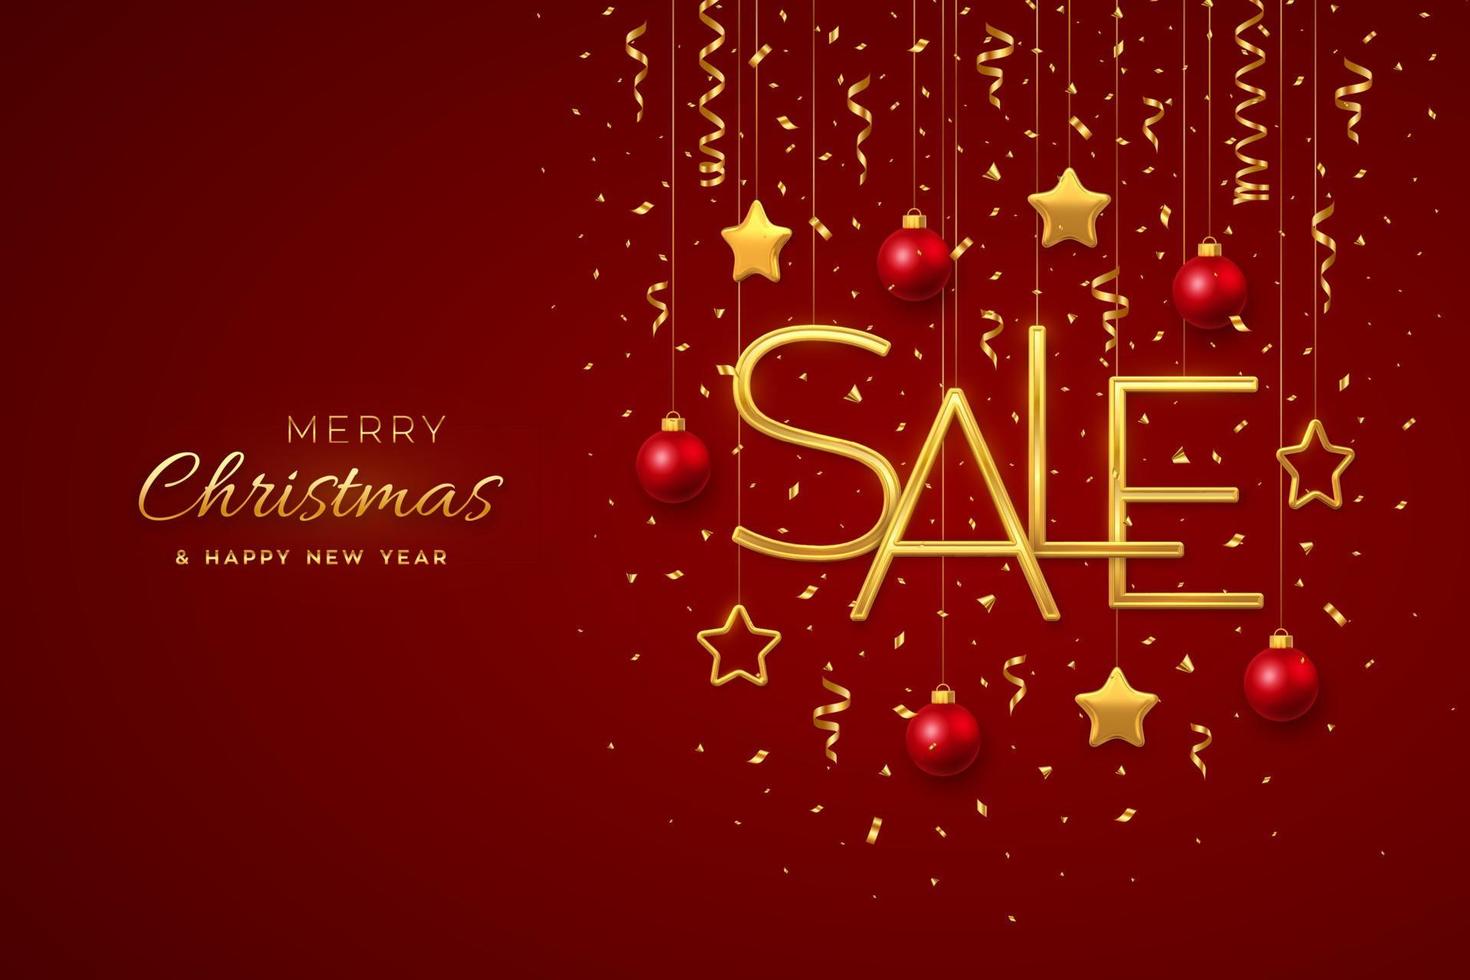 Christmas sale design banner template. Hanging Golden metallic Sale letters with 3D metallic stars, balls and confetti on red background. Advertising poster or flyer. Realistic vector illustration.